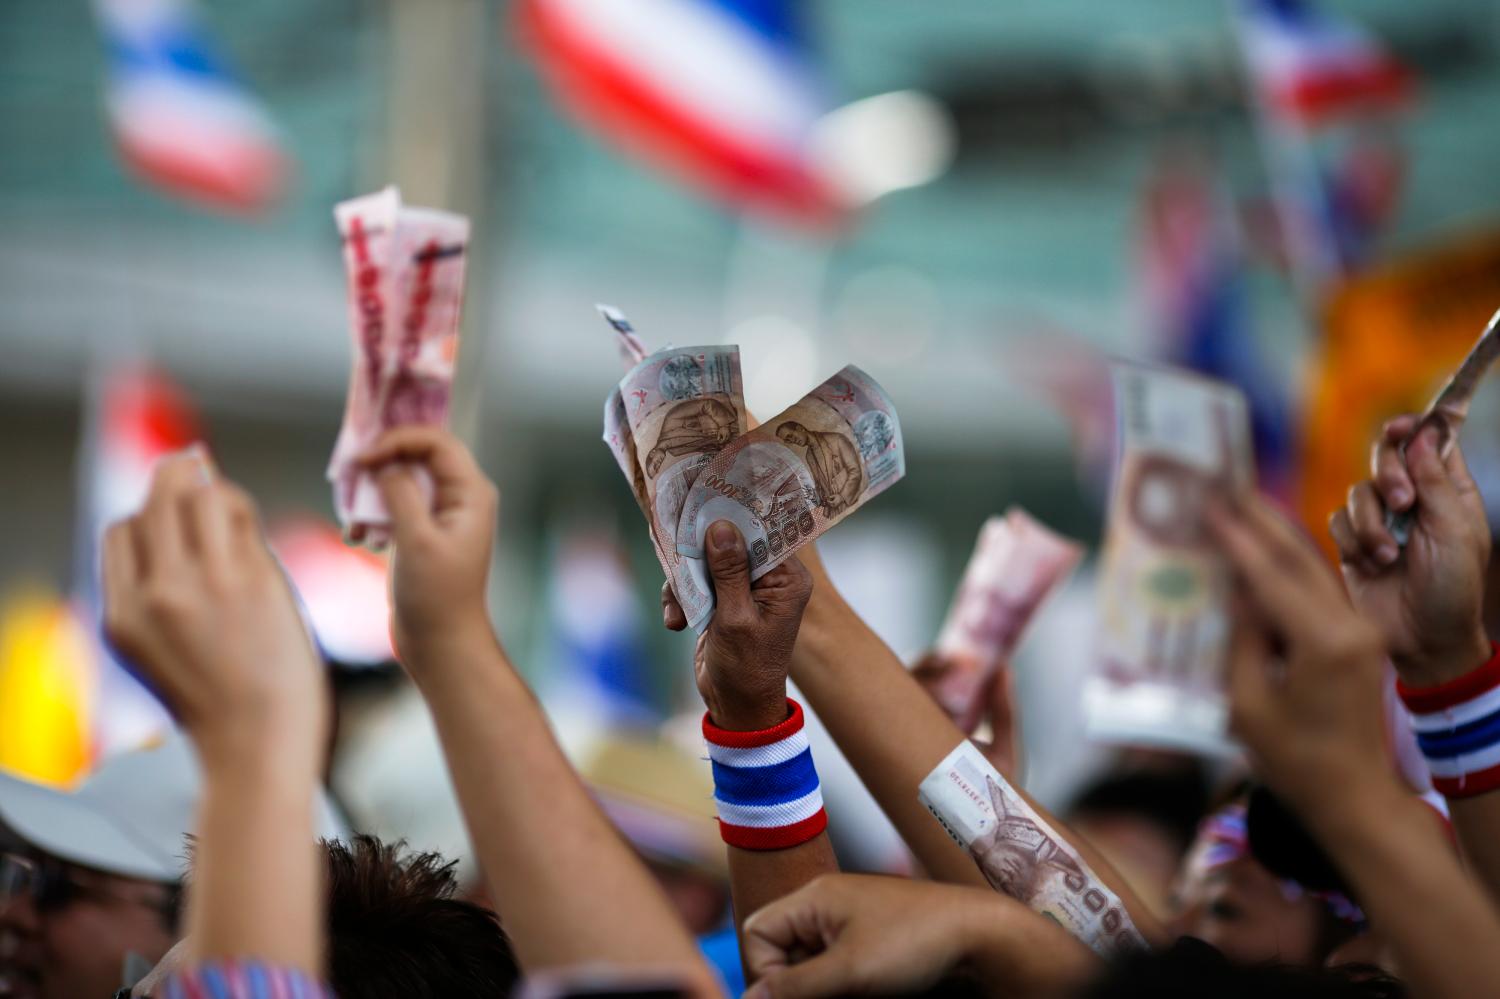 Anti-government protesters hold money to donate to protest leader Suthep Thaugsuban as he leads thousands of protesters in a march in central Bangkok January 19, 2014. Twenty-eight people were injured, seven of them seriously, in an explosion on Sunday at a camp of anti-government protesters in the center of the Thai capital, medical officials said. REUTERS/Athit Perawongmetha (THAILAND - Tags: POLITICS CIVIL UNREST) - GM1EA1J1C4C01